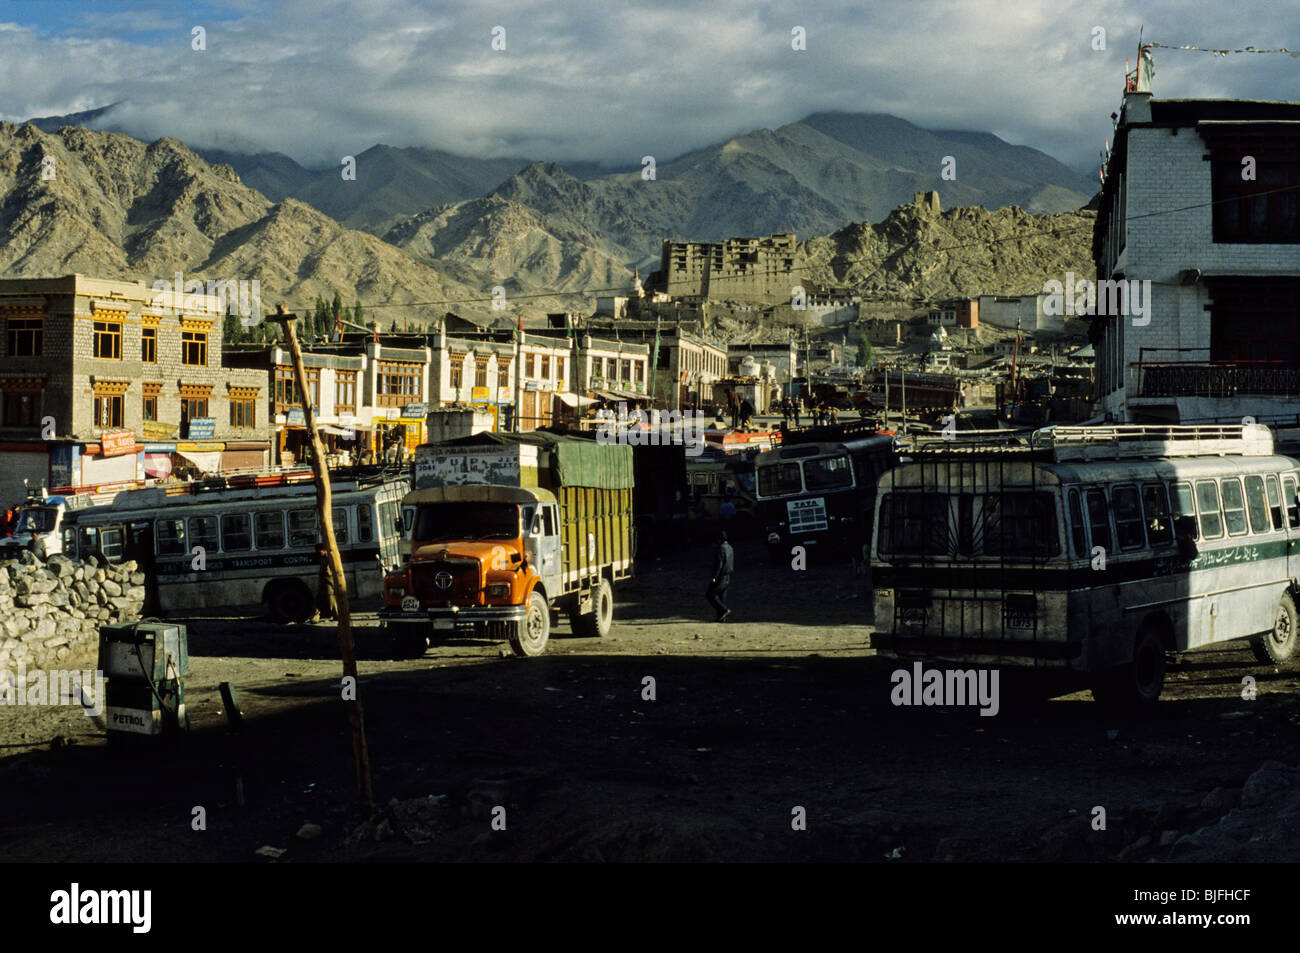 Northern India. Leh is the capital of Ladakh. The Bus Station. Stock Photo